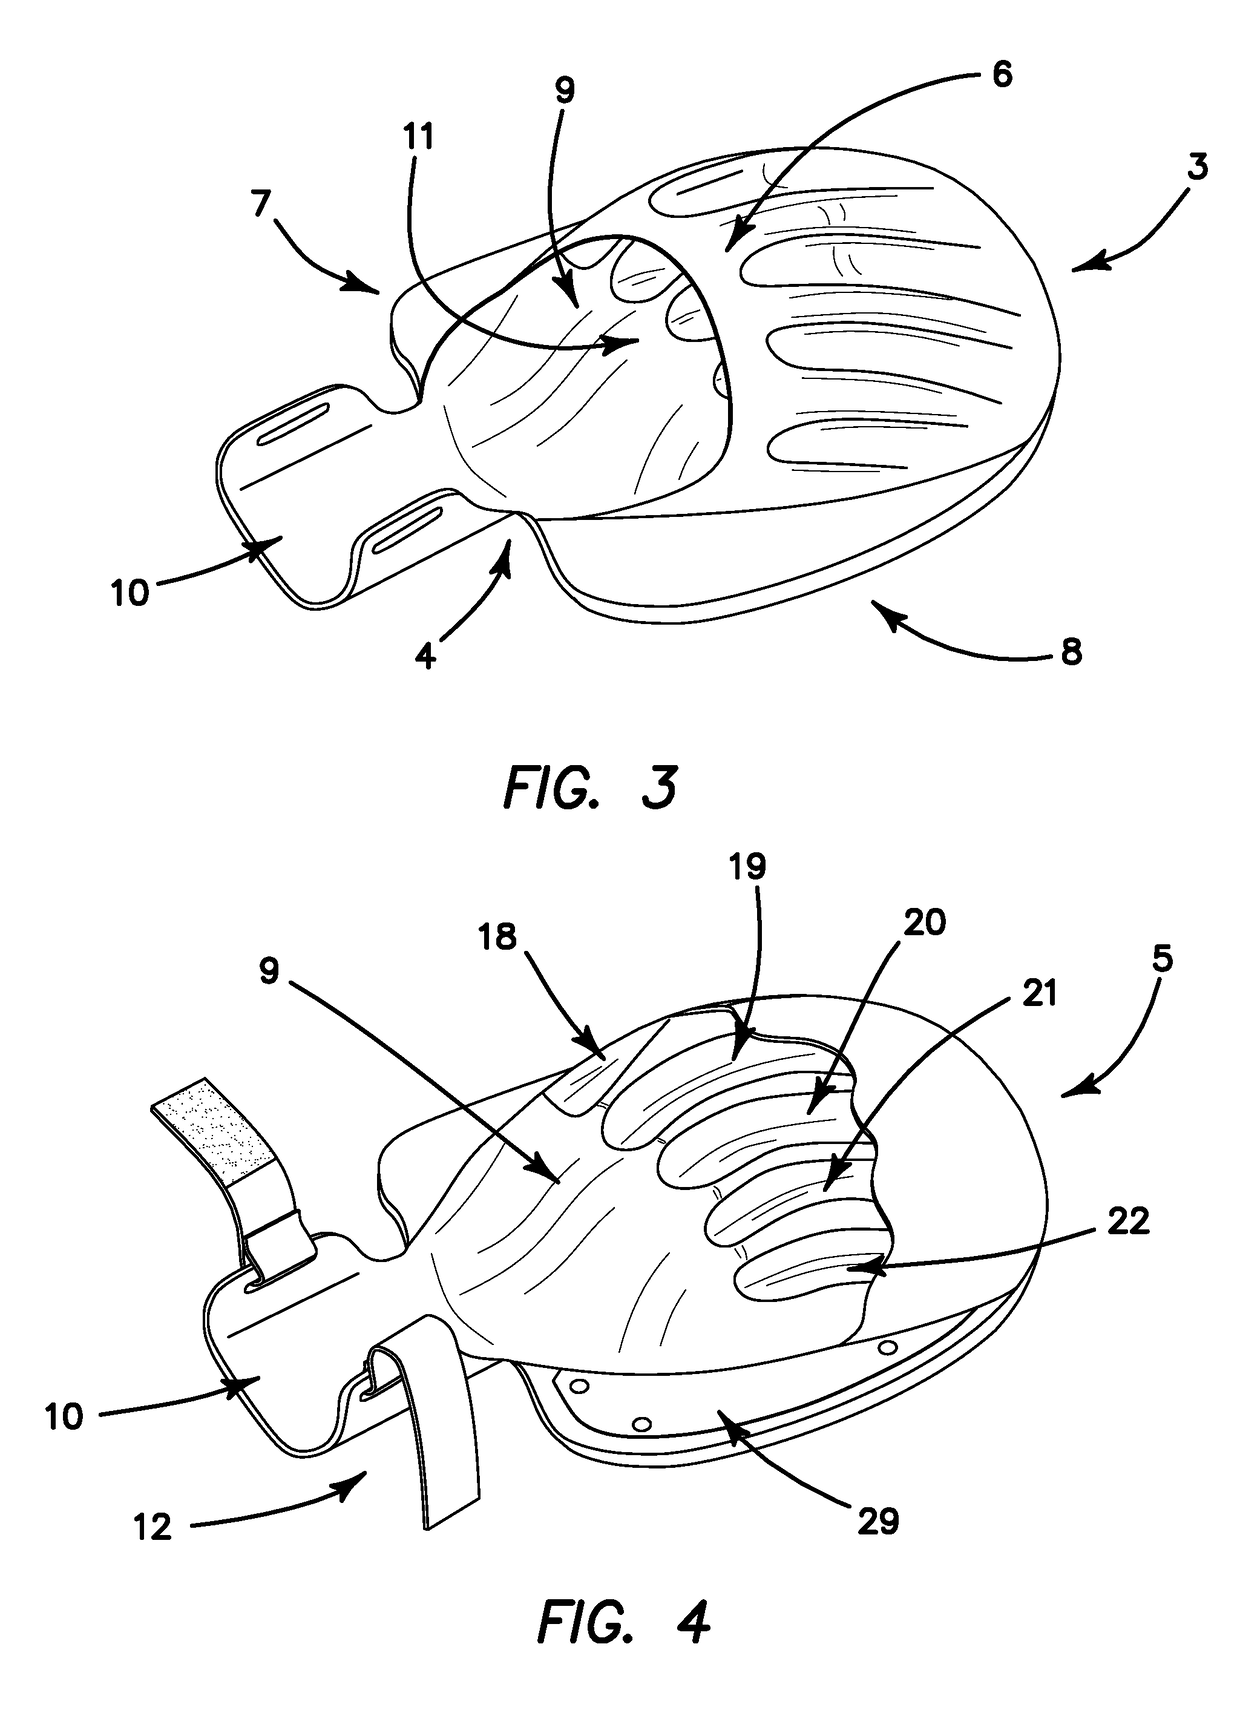 Apparatus and method for an improved hand fin